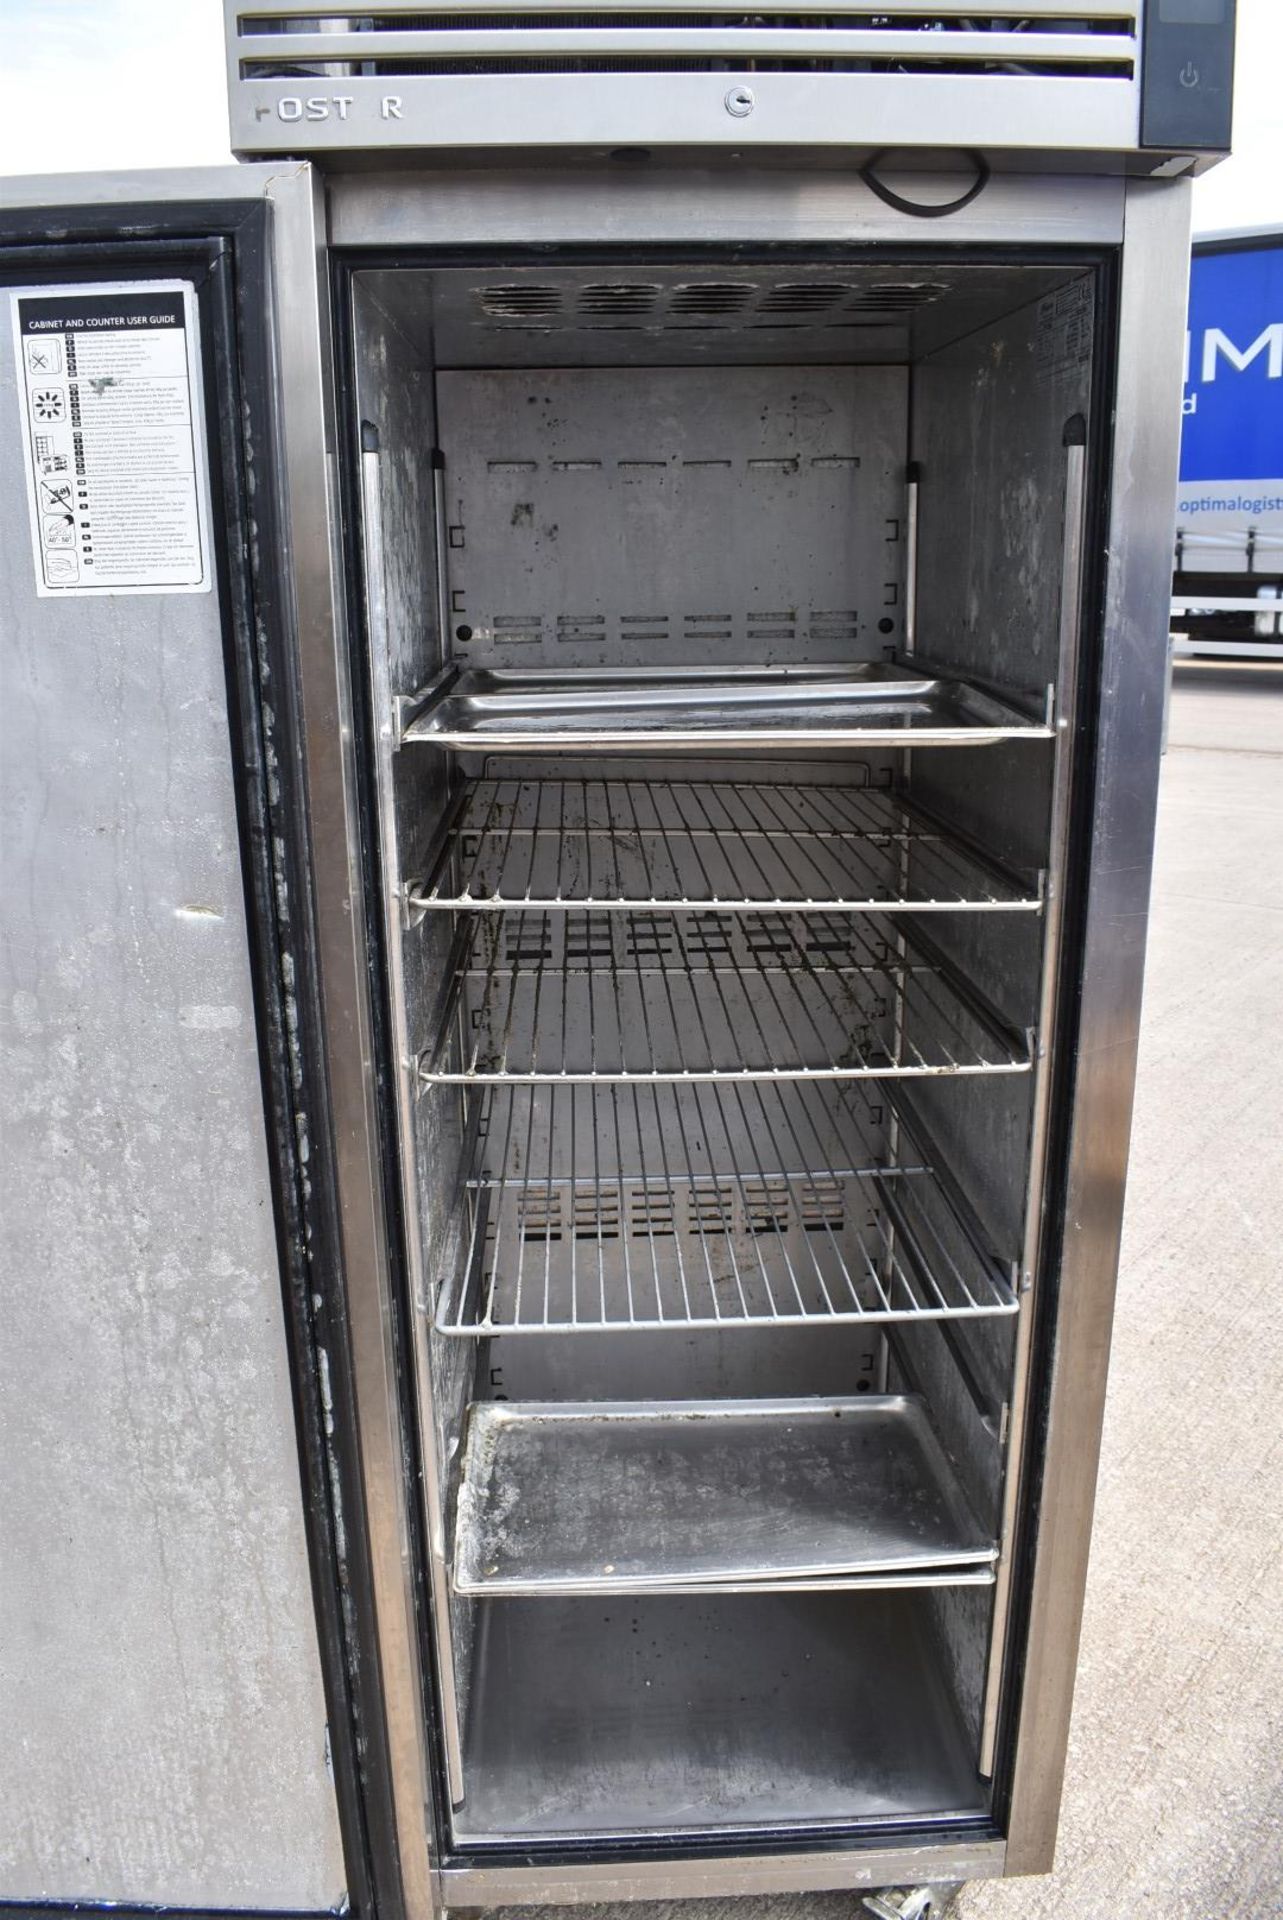 1 x Foster EcoPro G2 EP700M Upright Refrigerated Meat Cabinet - Stainless Steel Exterior RRP £3,059 - Image 4 of 6